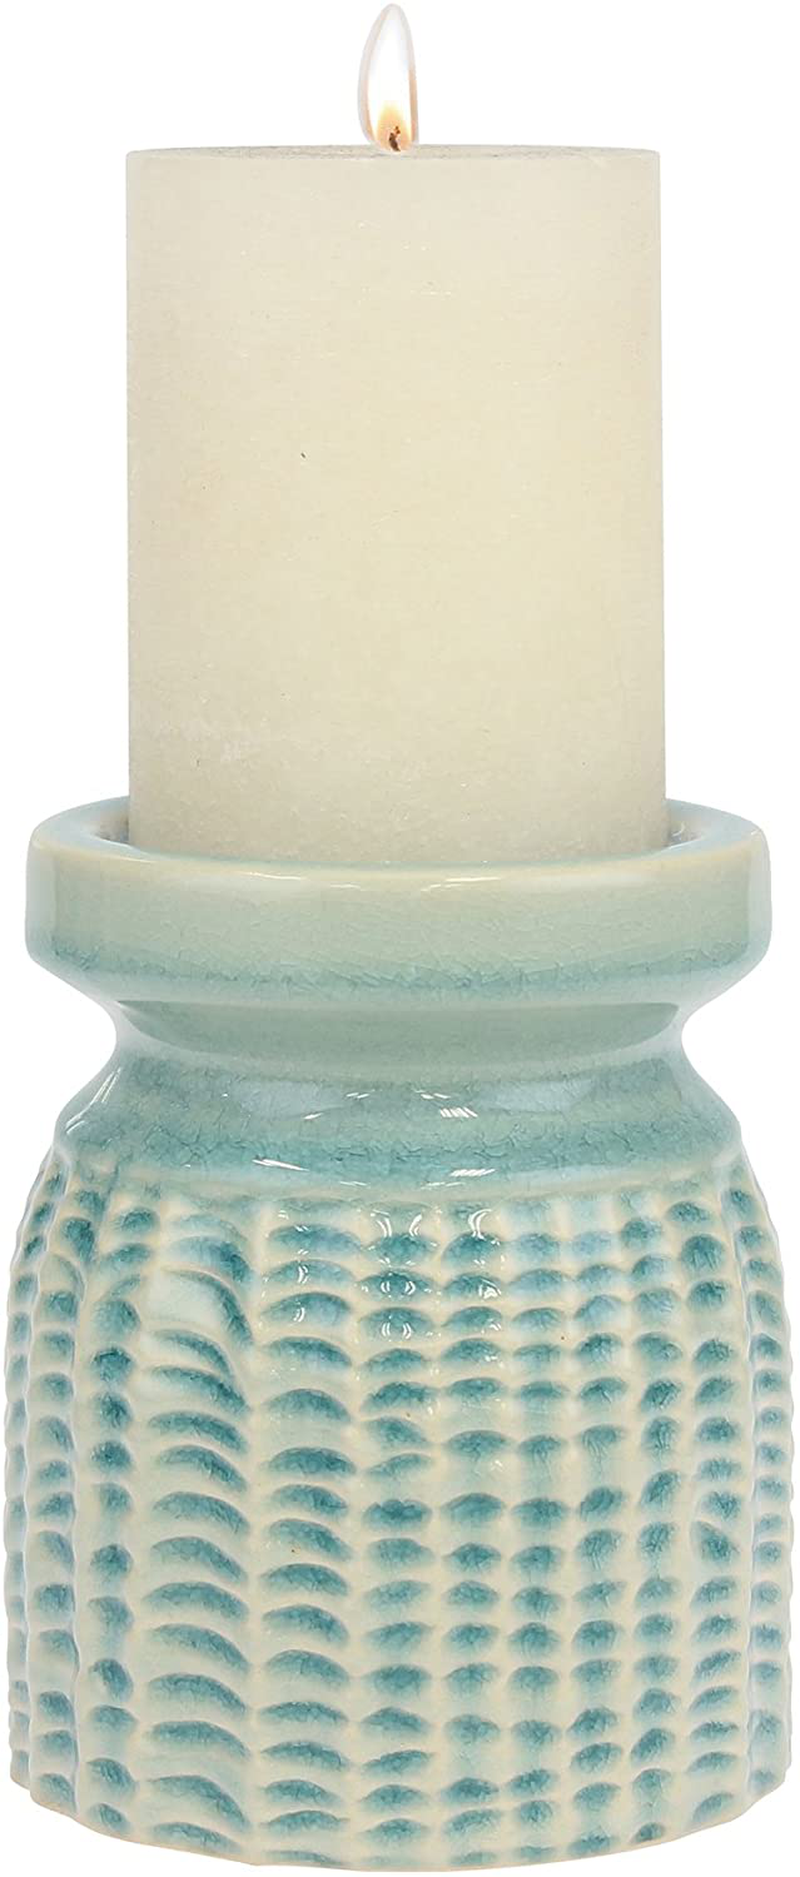 Stonebriar Decorative Textured Pale Ocean Ceramic Pillar Candle Holder, Coastal Home Decor Accents, Beach Inspired Design for the Living Room, Bathroom, or Bedroom of your Seaside Cottage Decor